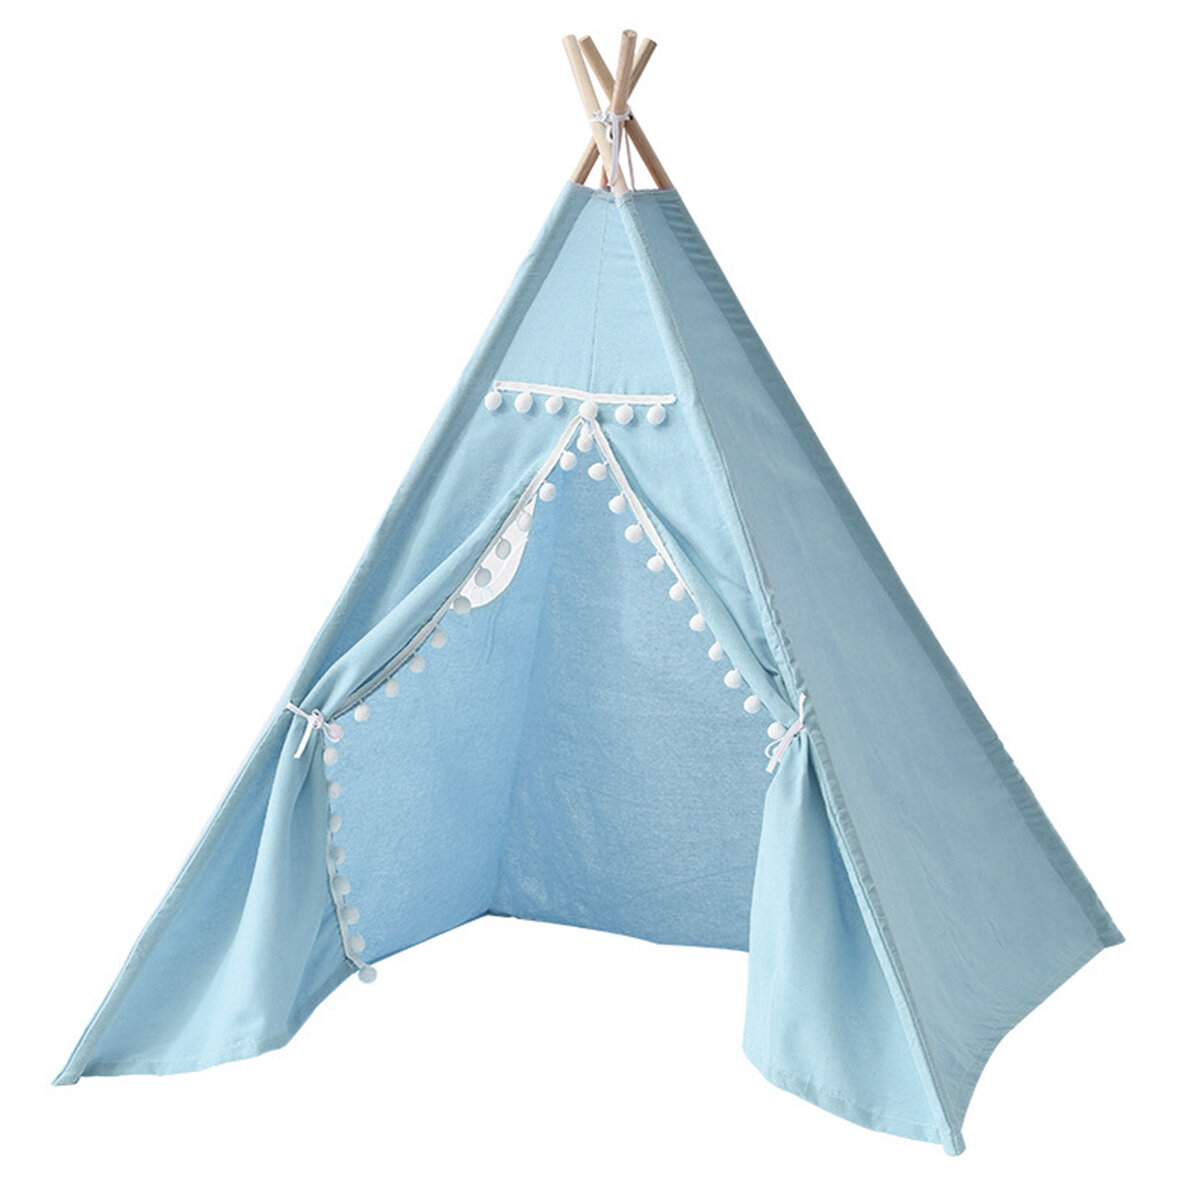 1.35M/1.6M /1.8M Large Cotton Canvas Kids Teepee Triangle Tent Children Indian Playhouse Pretend Play Tent Decoration Ga